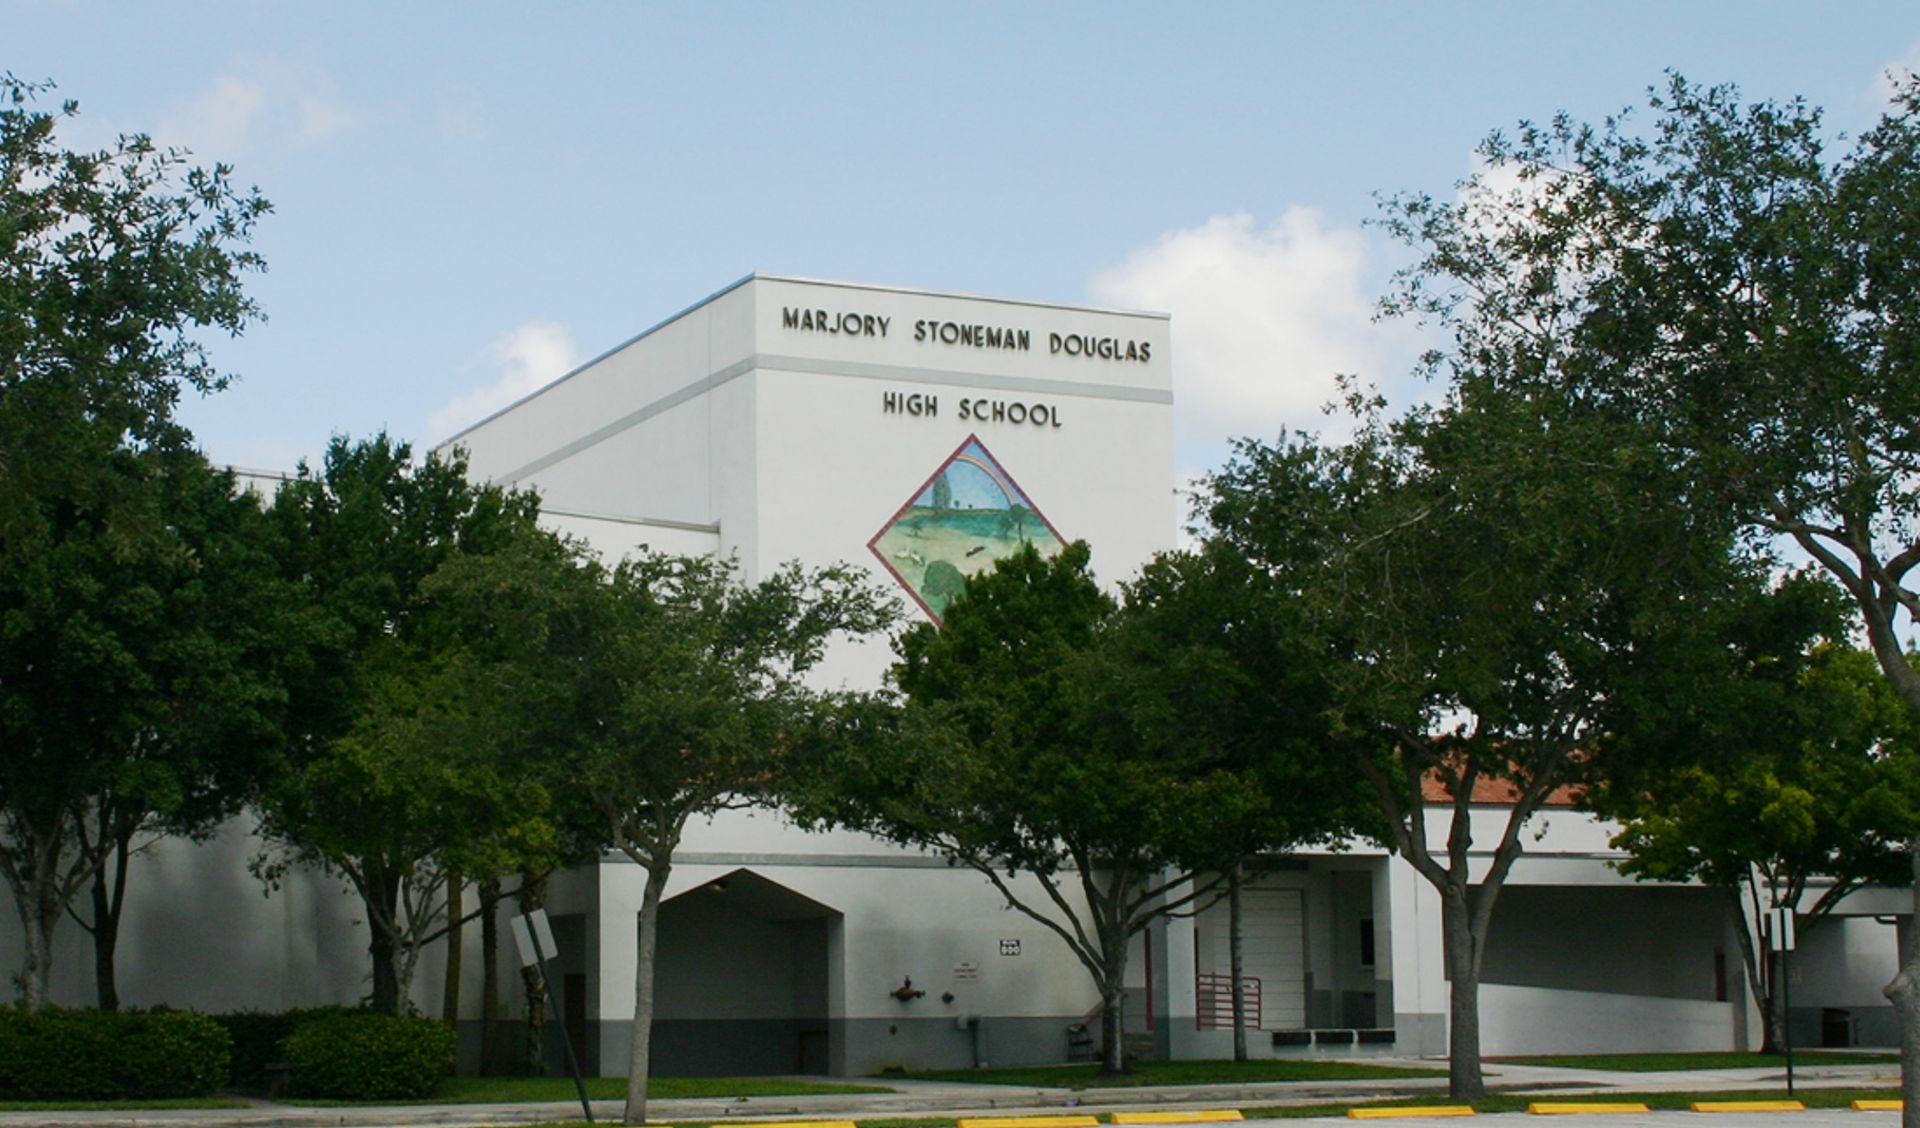 Marjory Stoneman Douglas High School in Parkland, Florida, where a gunman killed 17 students and staff members in February 